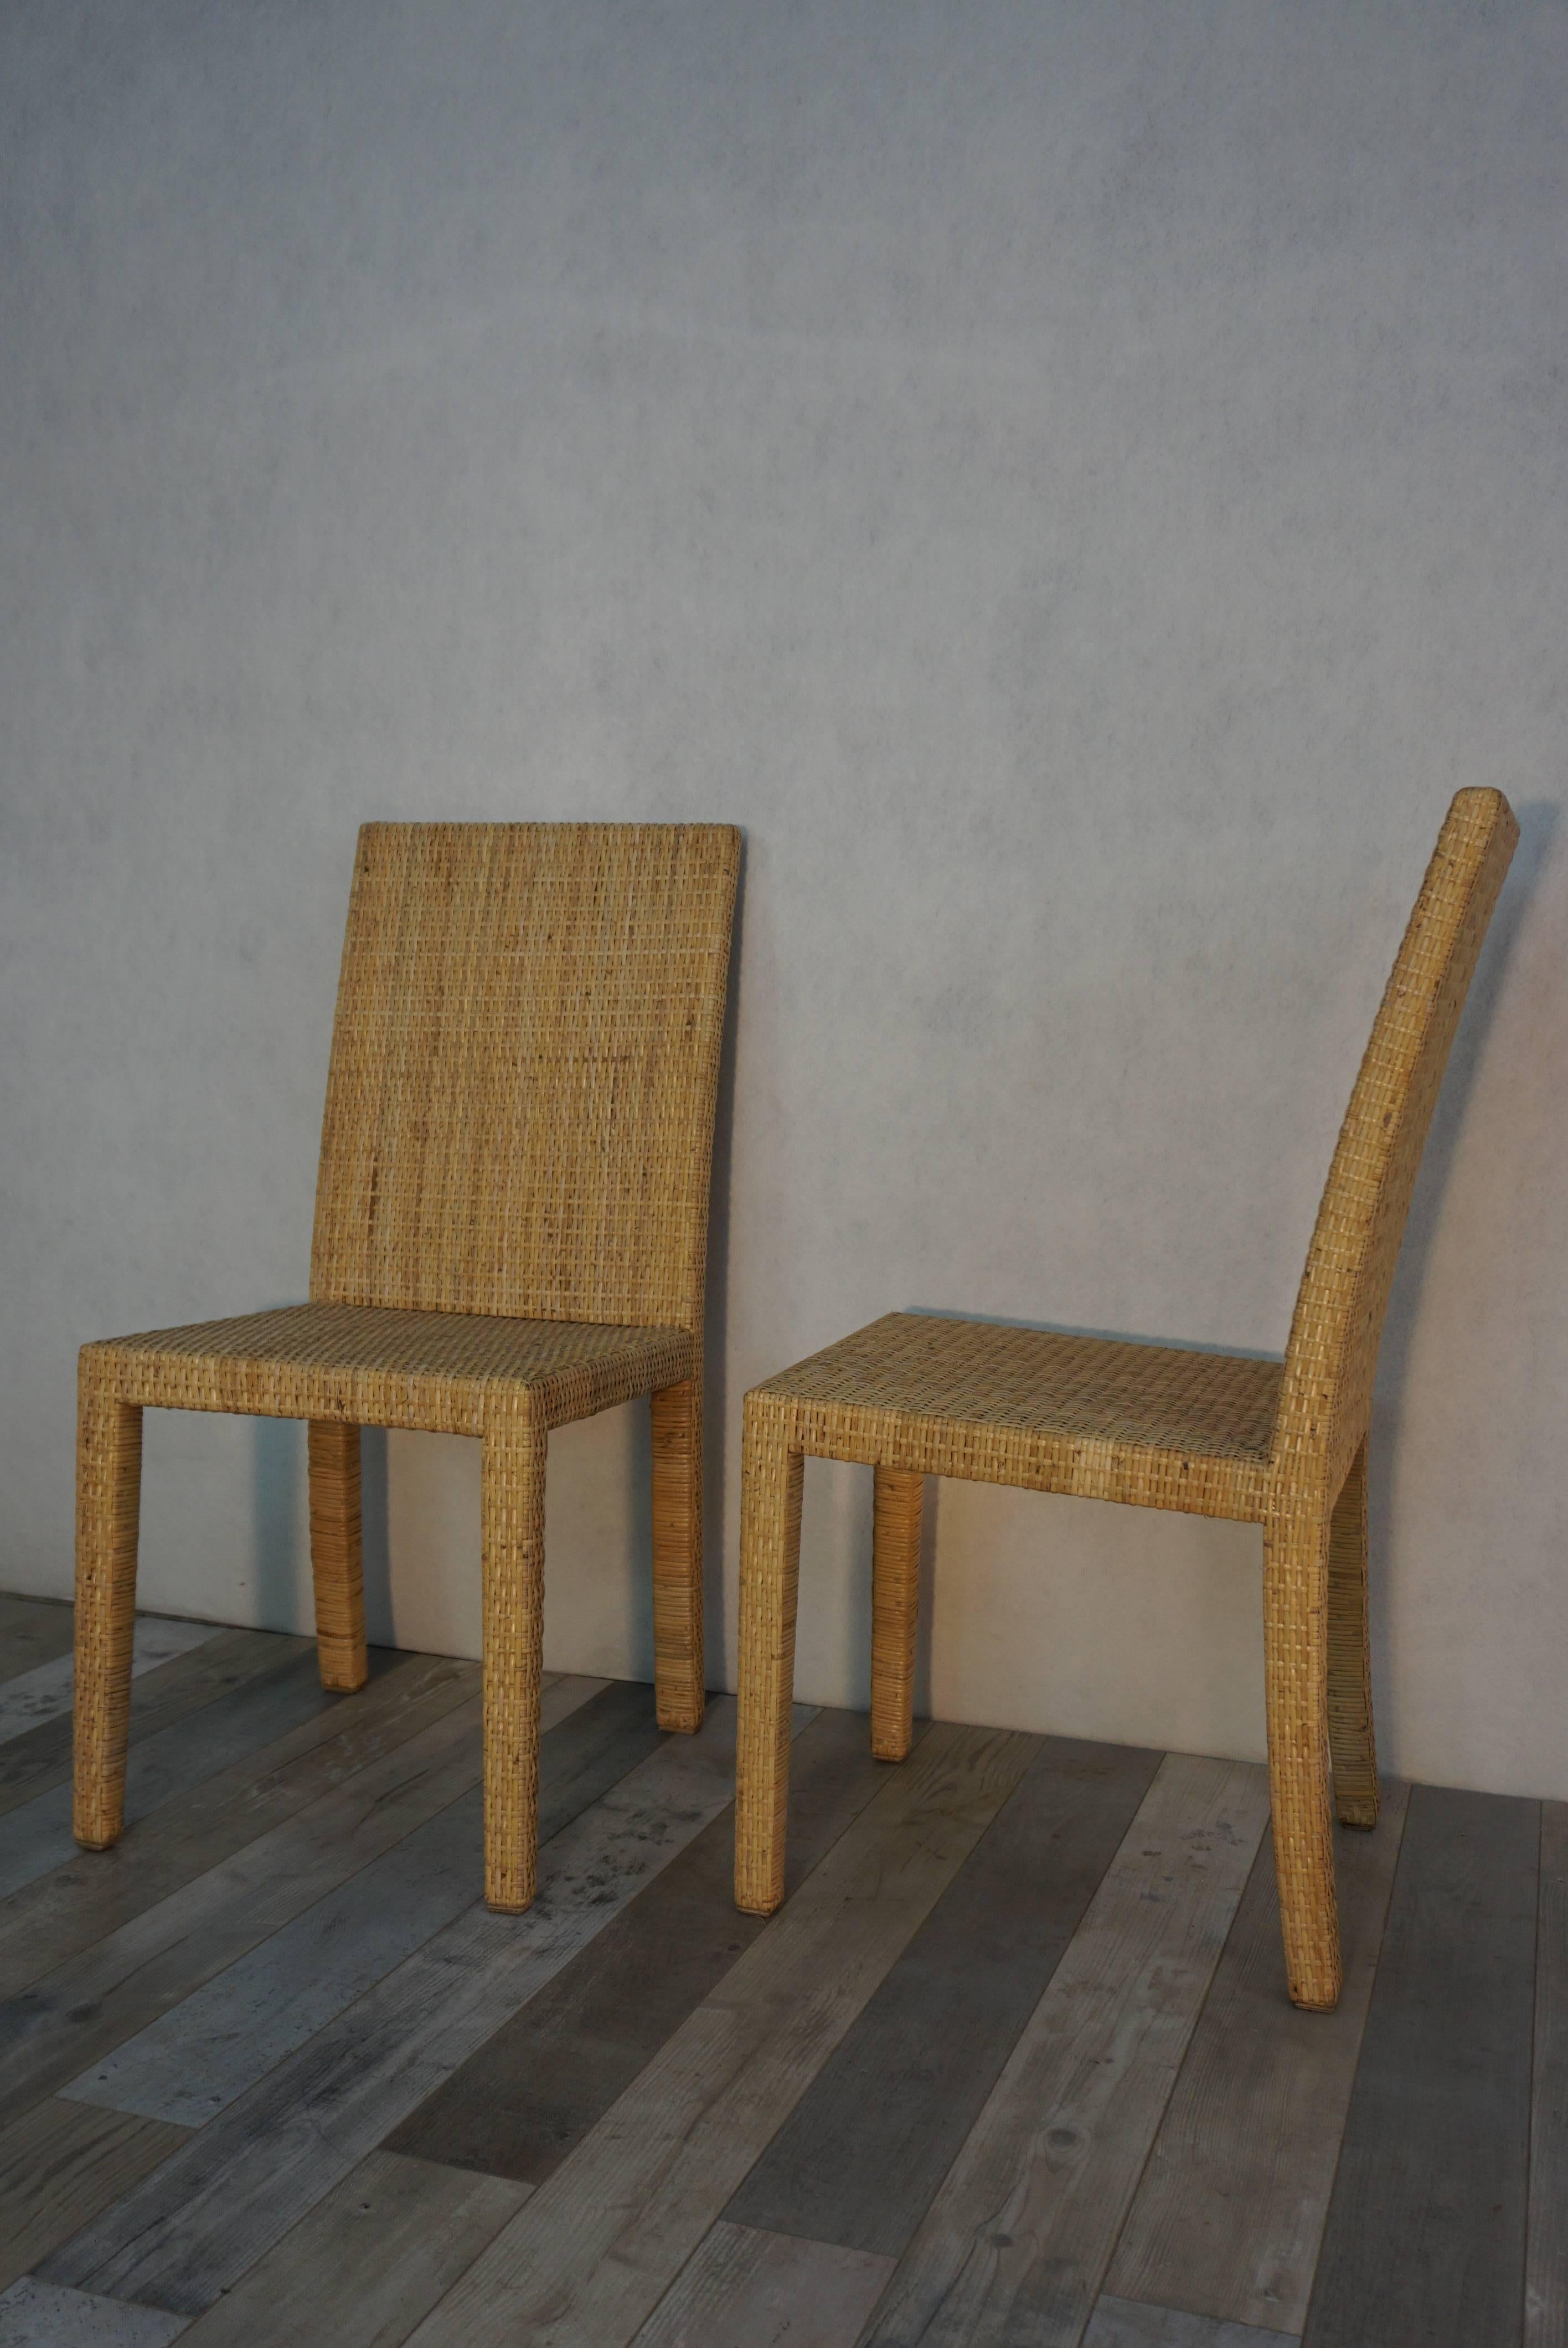 French Set of Six Wooden Chairs Rattan 1935, Jean-Michel Frank for Ecart International